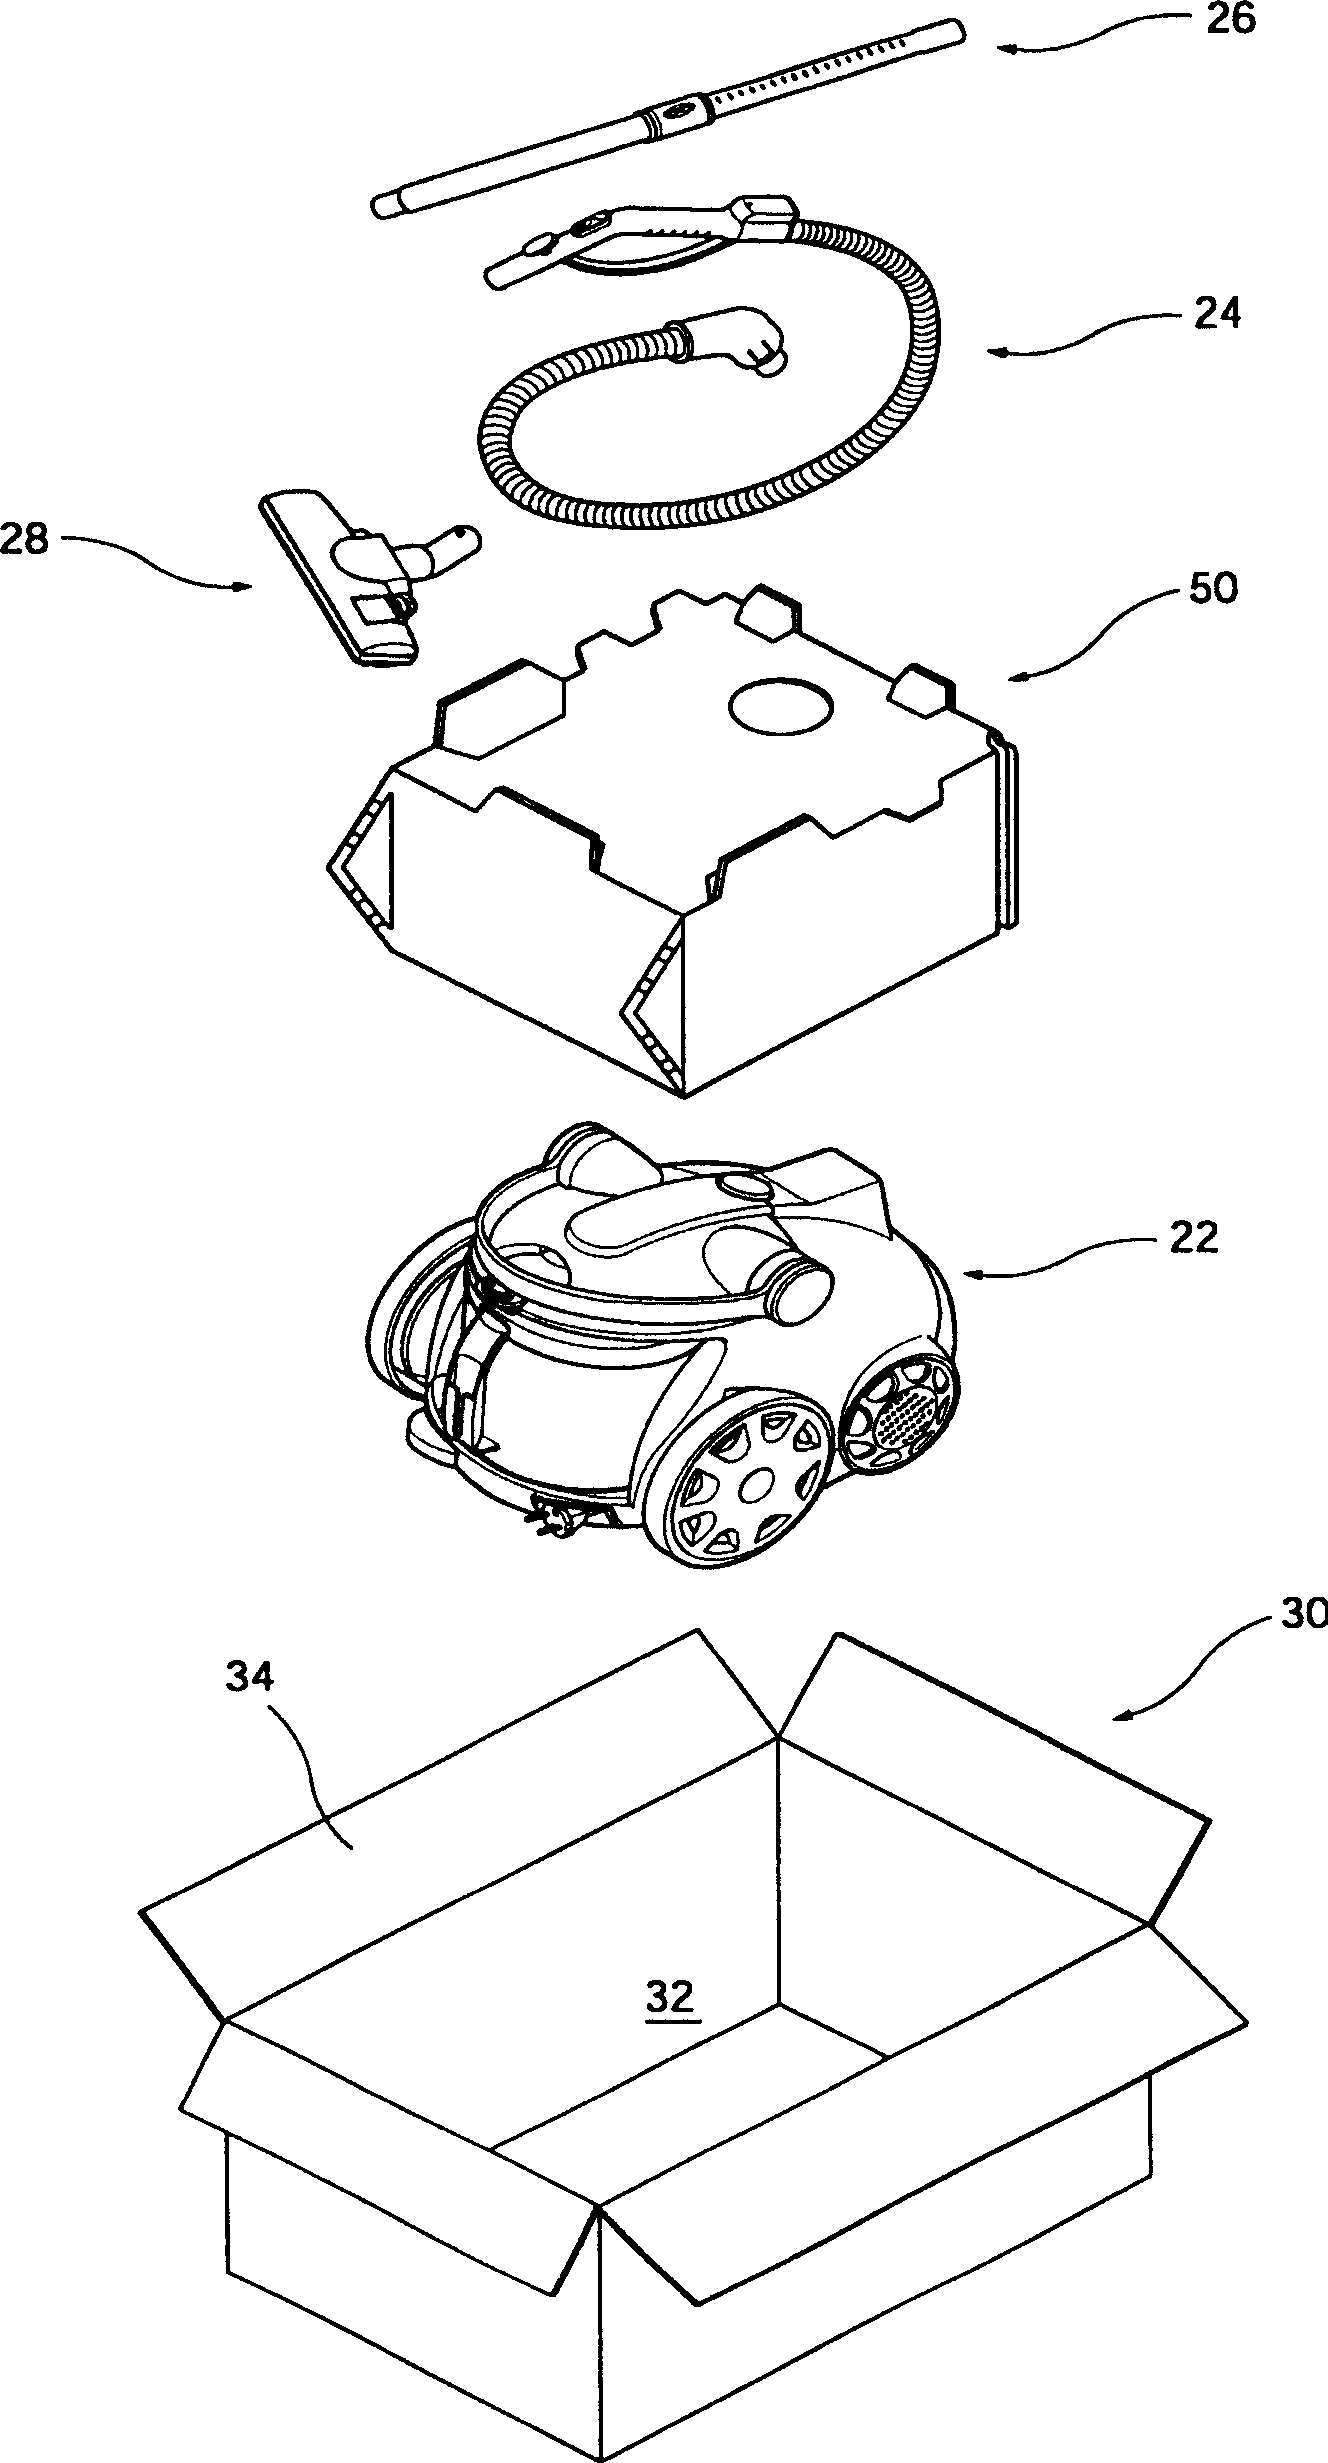 Shock-absorbing component used for package of vacuum sweeper